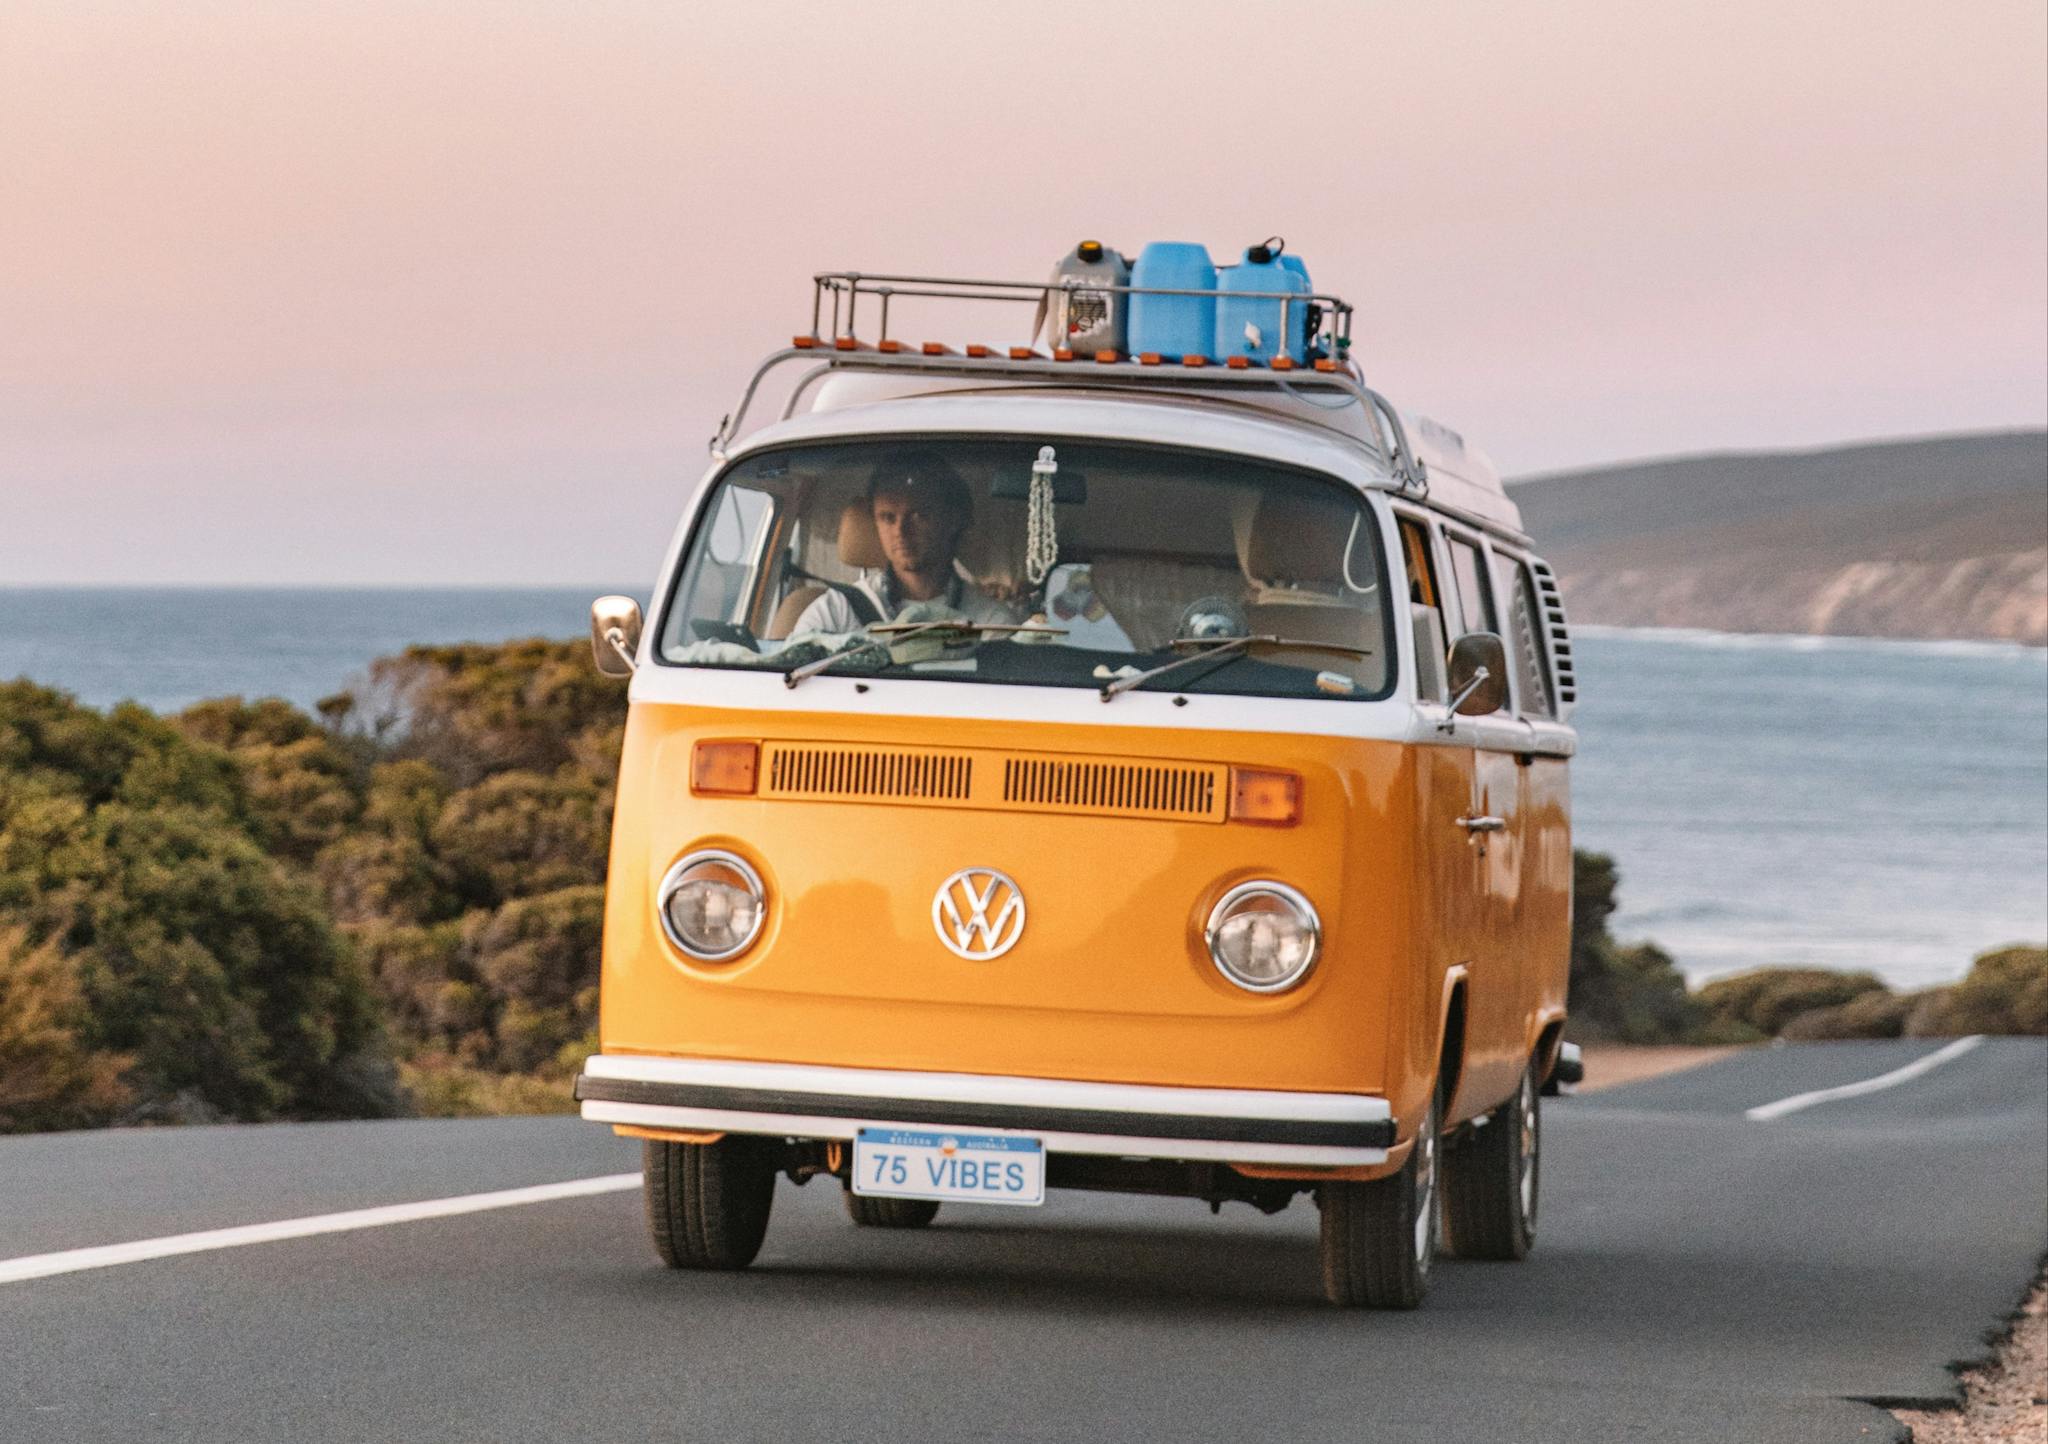 A yellow Volkswagen van with the license plate '75 VIBES' drives along a coastal road. Surfboards are visible on the roof rack, hinting at an adventurous beach outing. Inside, a person is focused on the road ahead, while the backdrop features a calm sea and a clear sky at twilight, conveying a sense of freedom and the spirit of a road trip along the picturesque coastline. @75vibes_ 09/2020 - Vanlifezone (Issue 1)